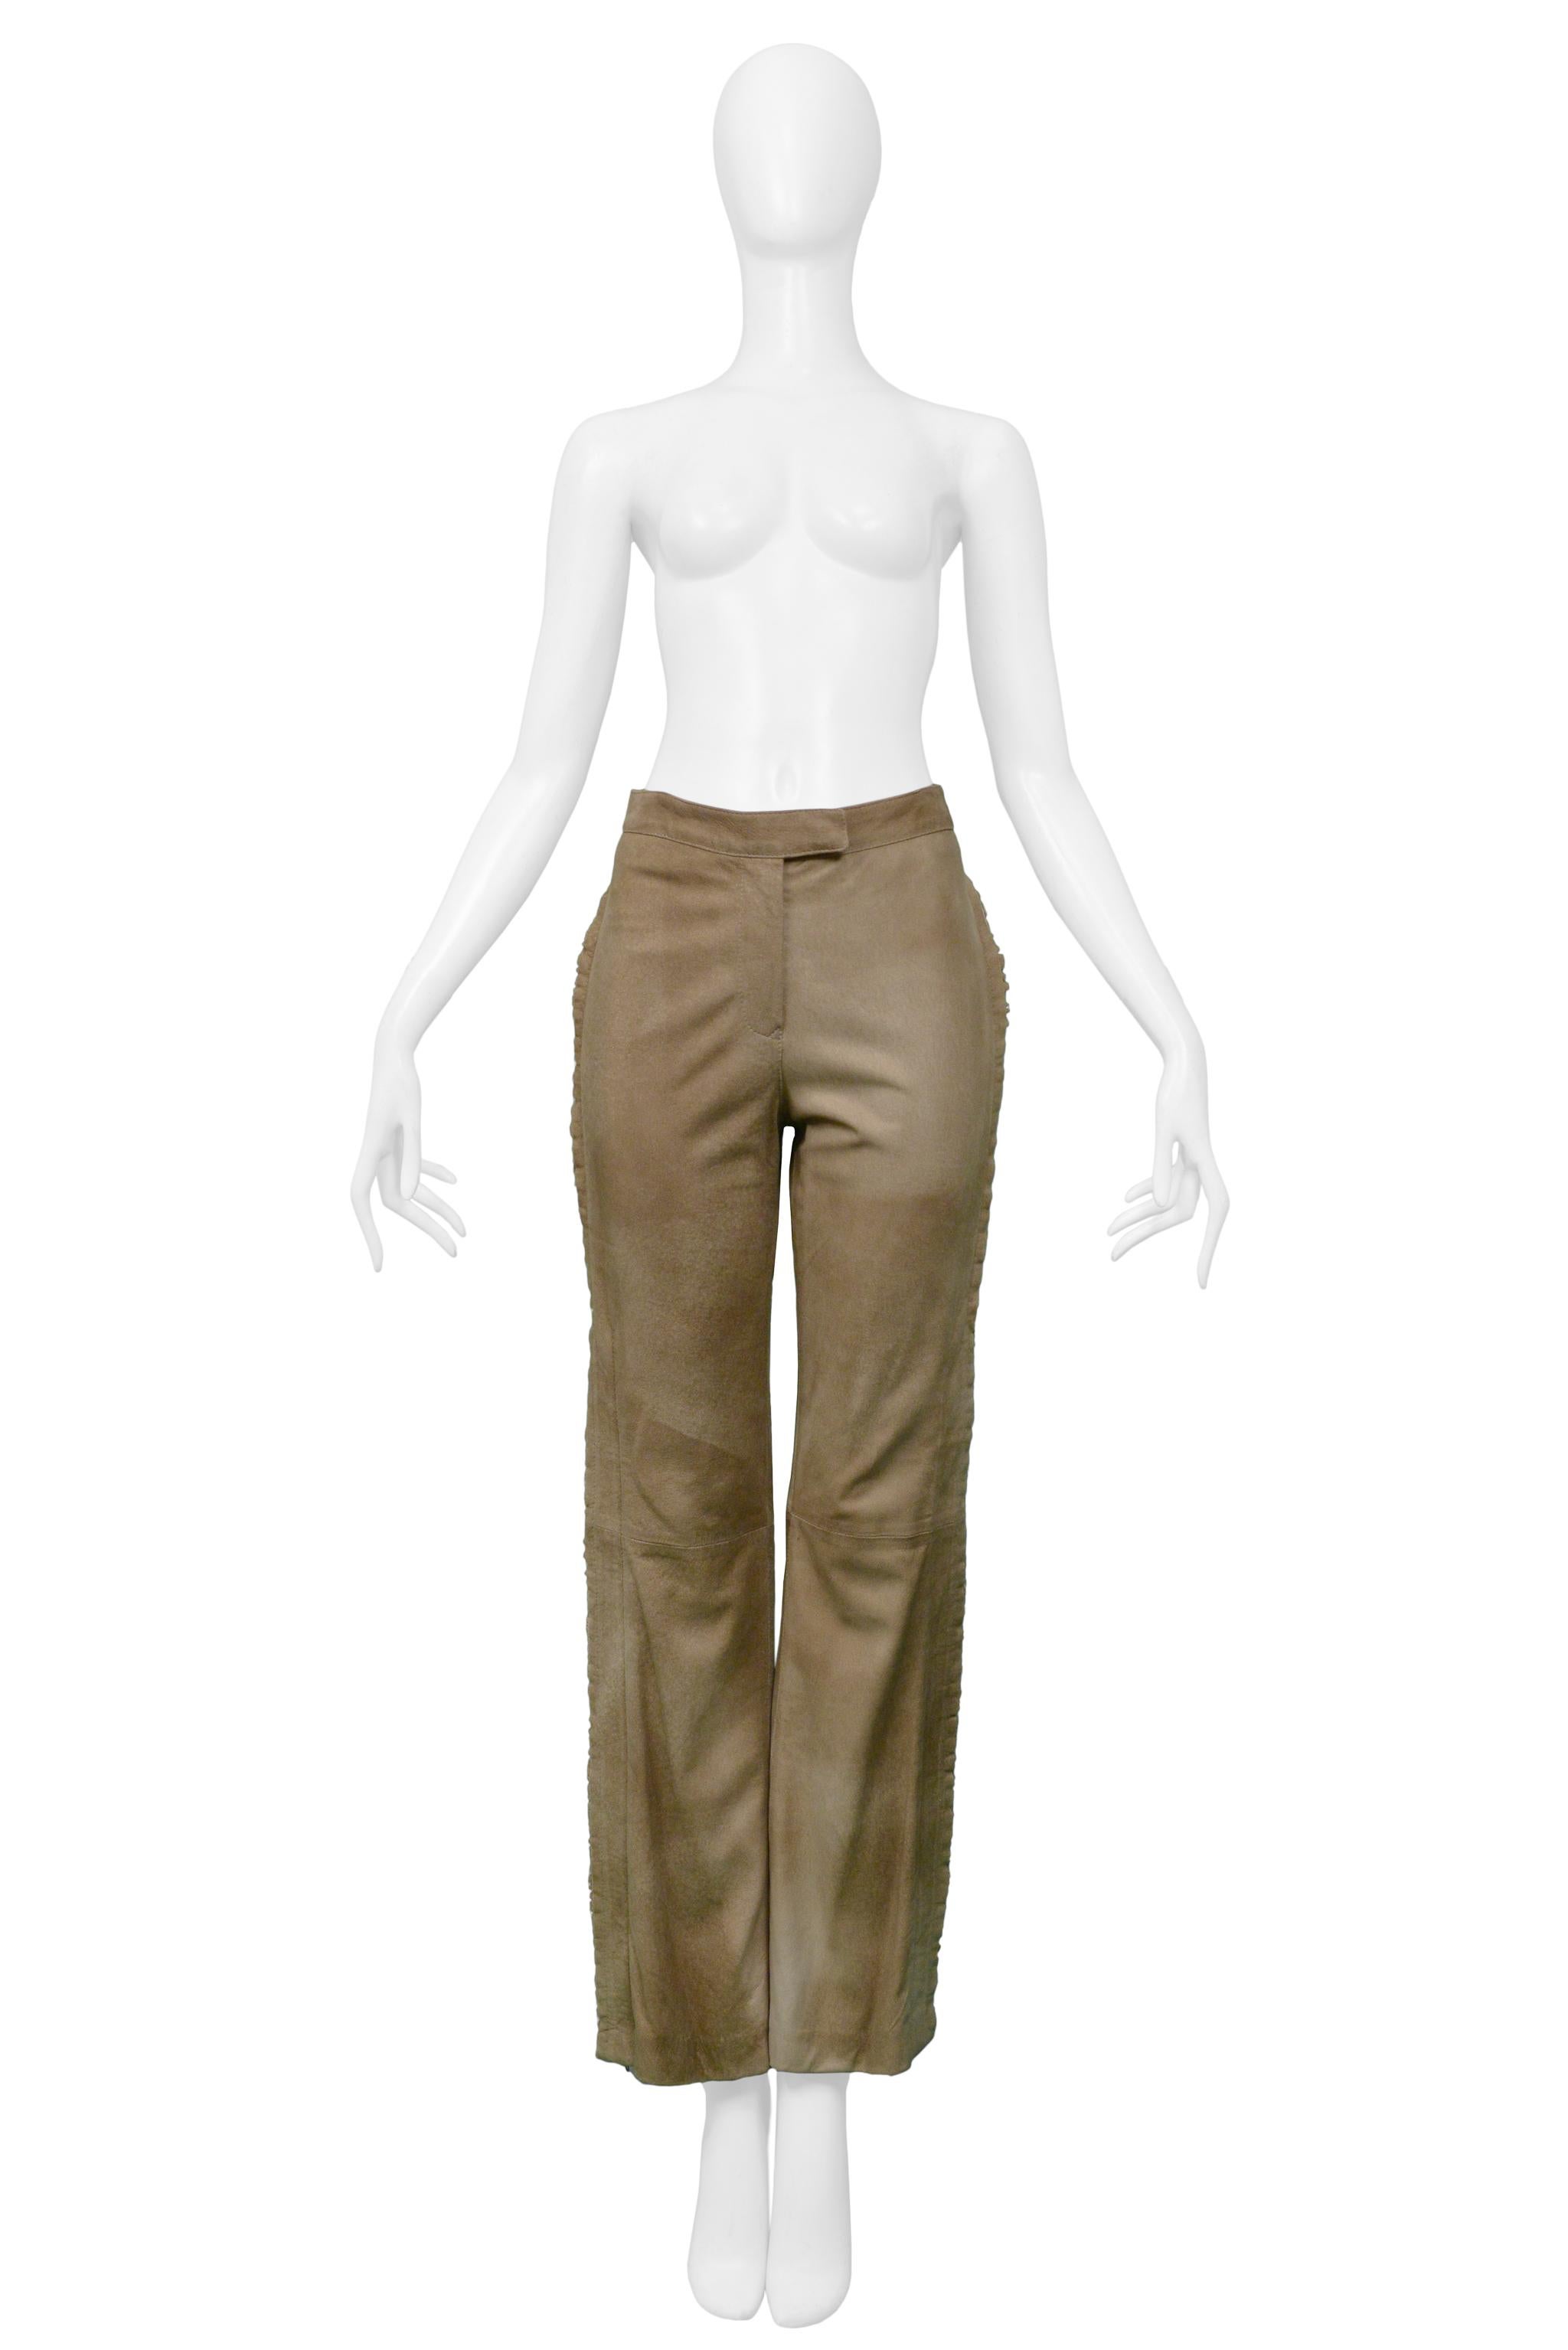 Resurrection Vintage is excited to offer a vintage pair of Gianfranco Ferre tan suede pants featuring a flat front, covered center front zipper and hook closure, ruffled trim at sides, and back buckle detail.

Gianfranco Ferre
Small
Suede
Excellent